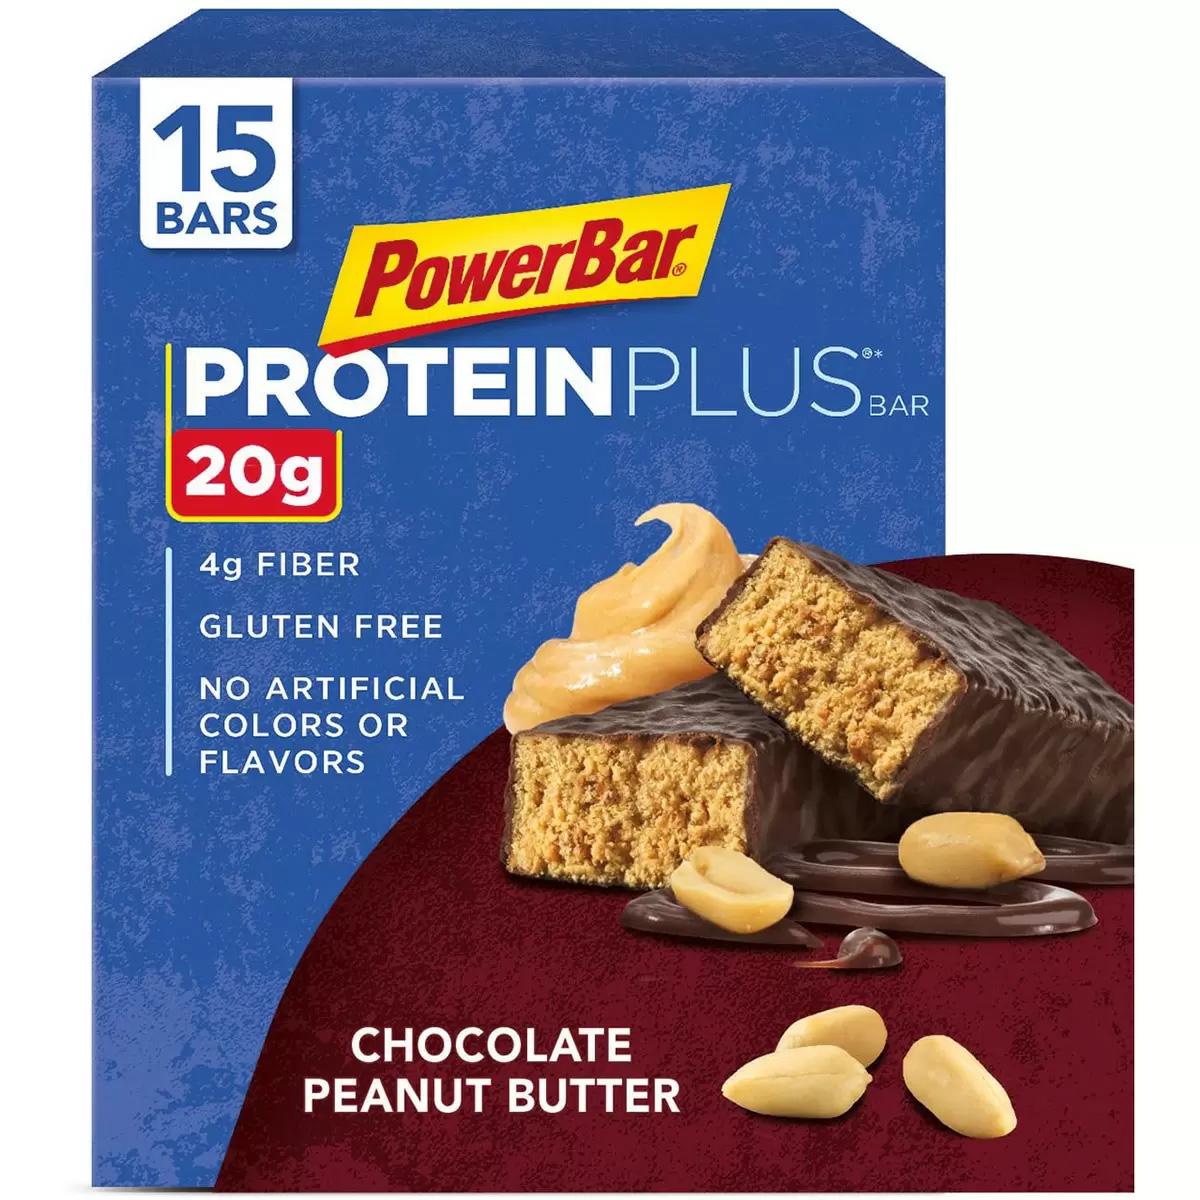 15 PowerBar Protein Plus Bars for $8.31 Shipped